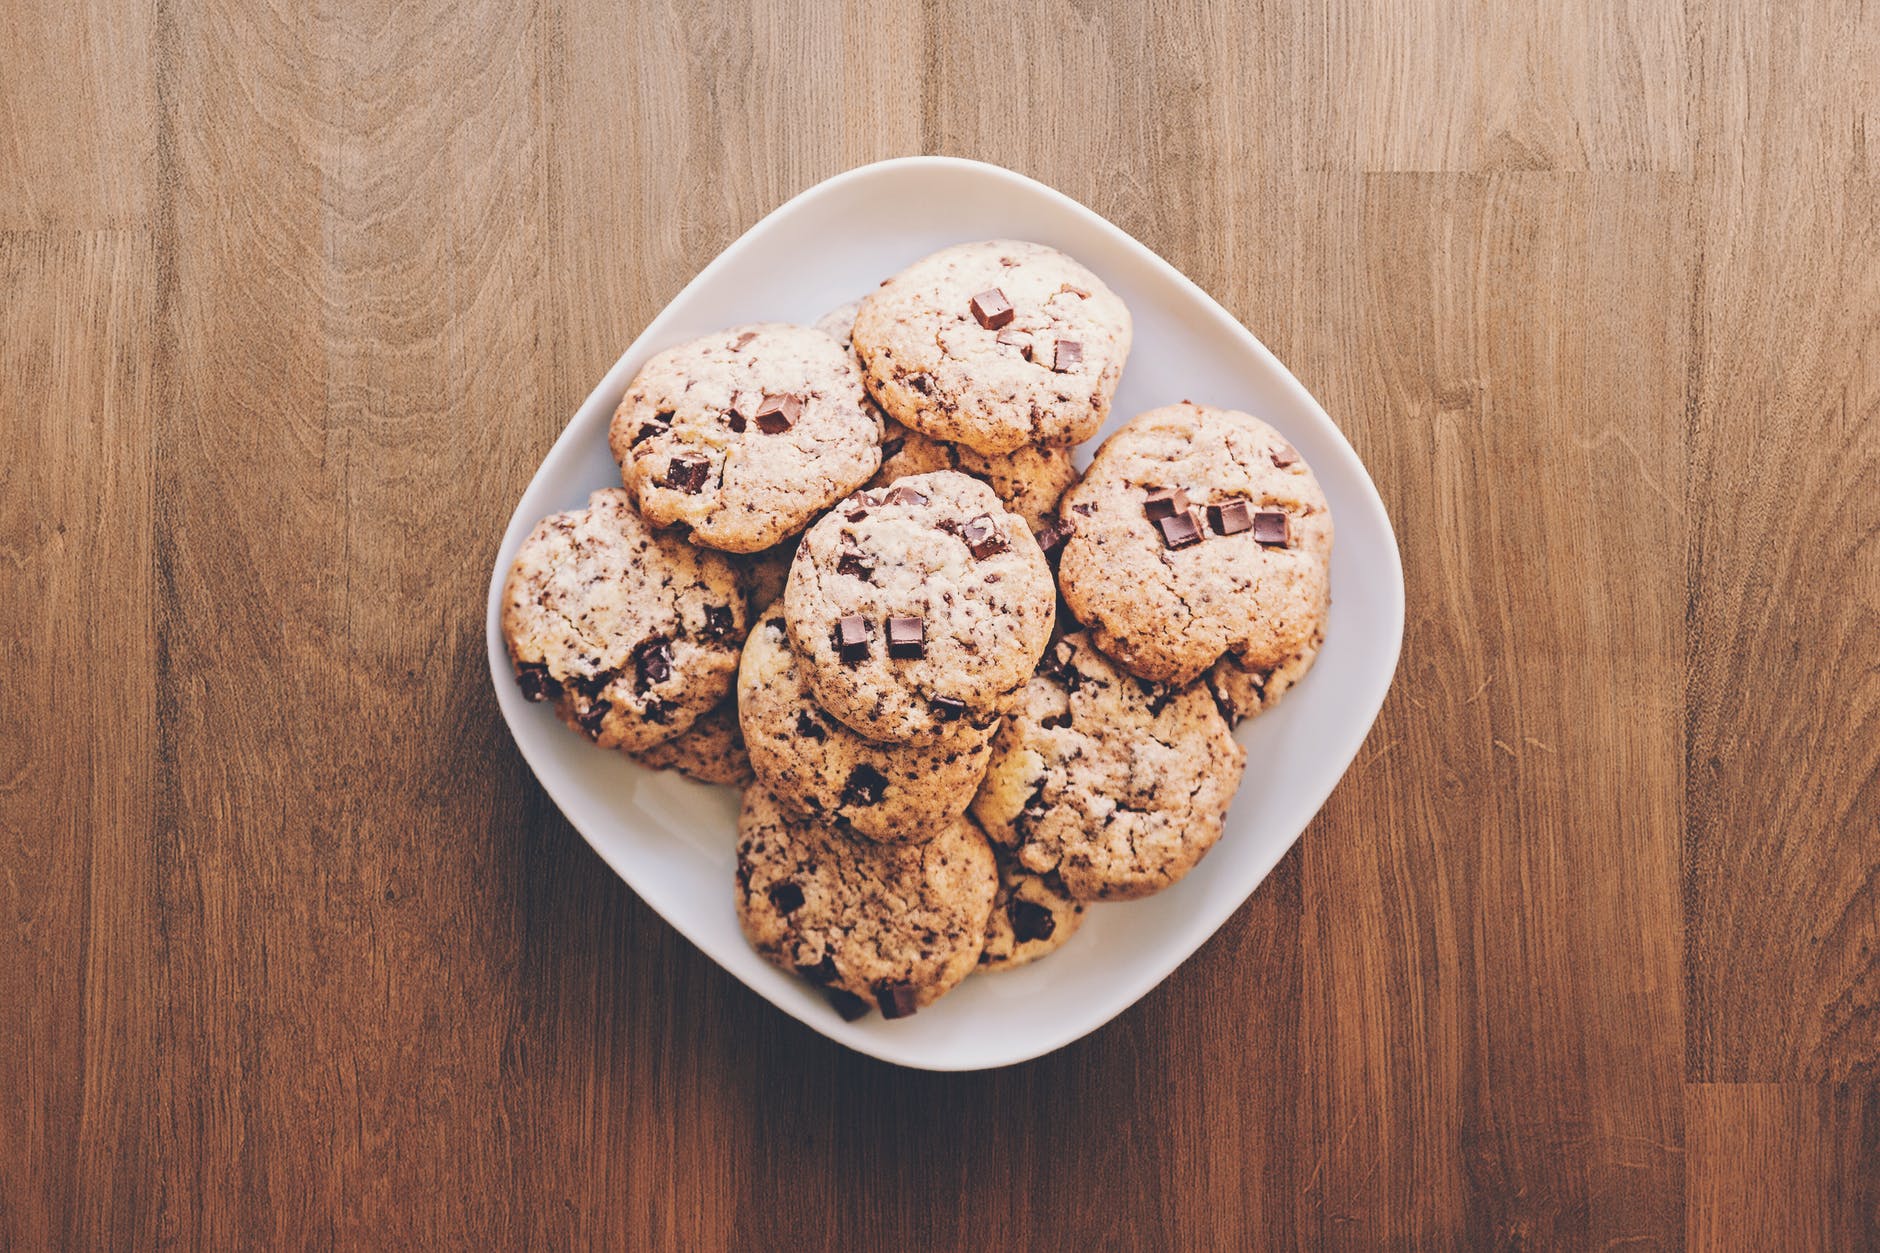 Freshly baked chocolate chip cookies on a white ceramic plate. | Photo: Pexels.